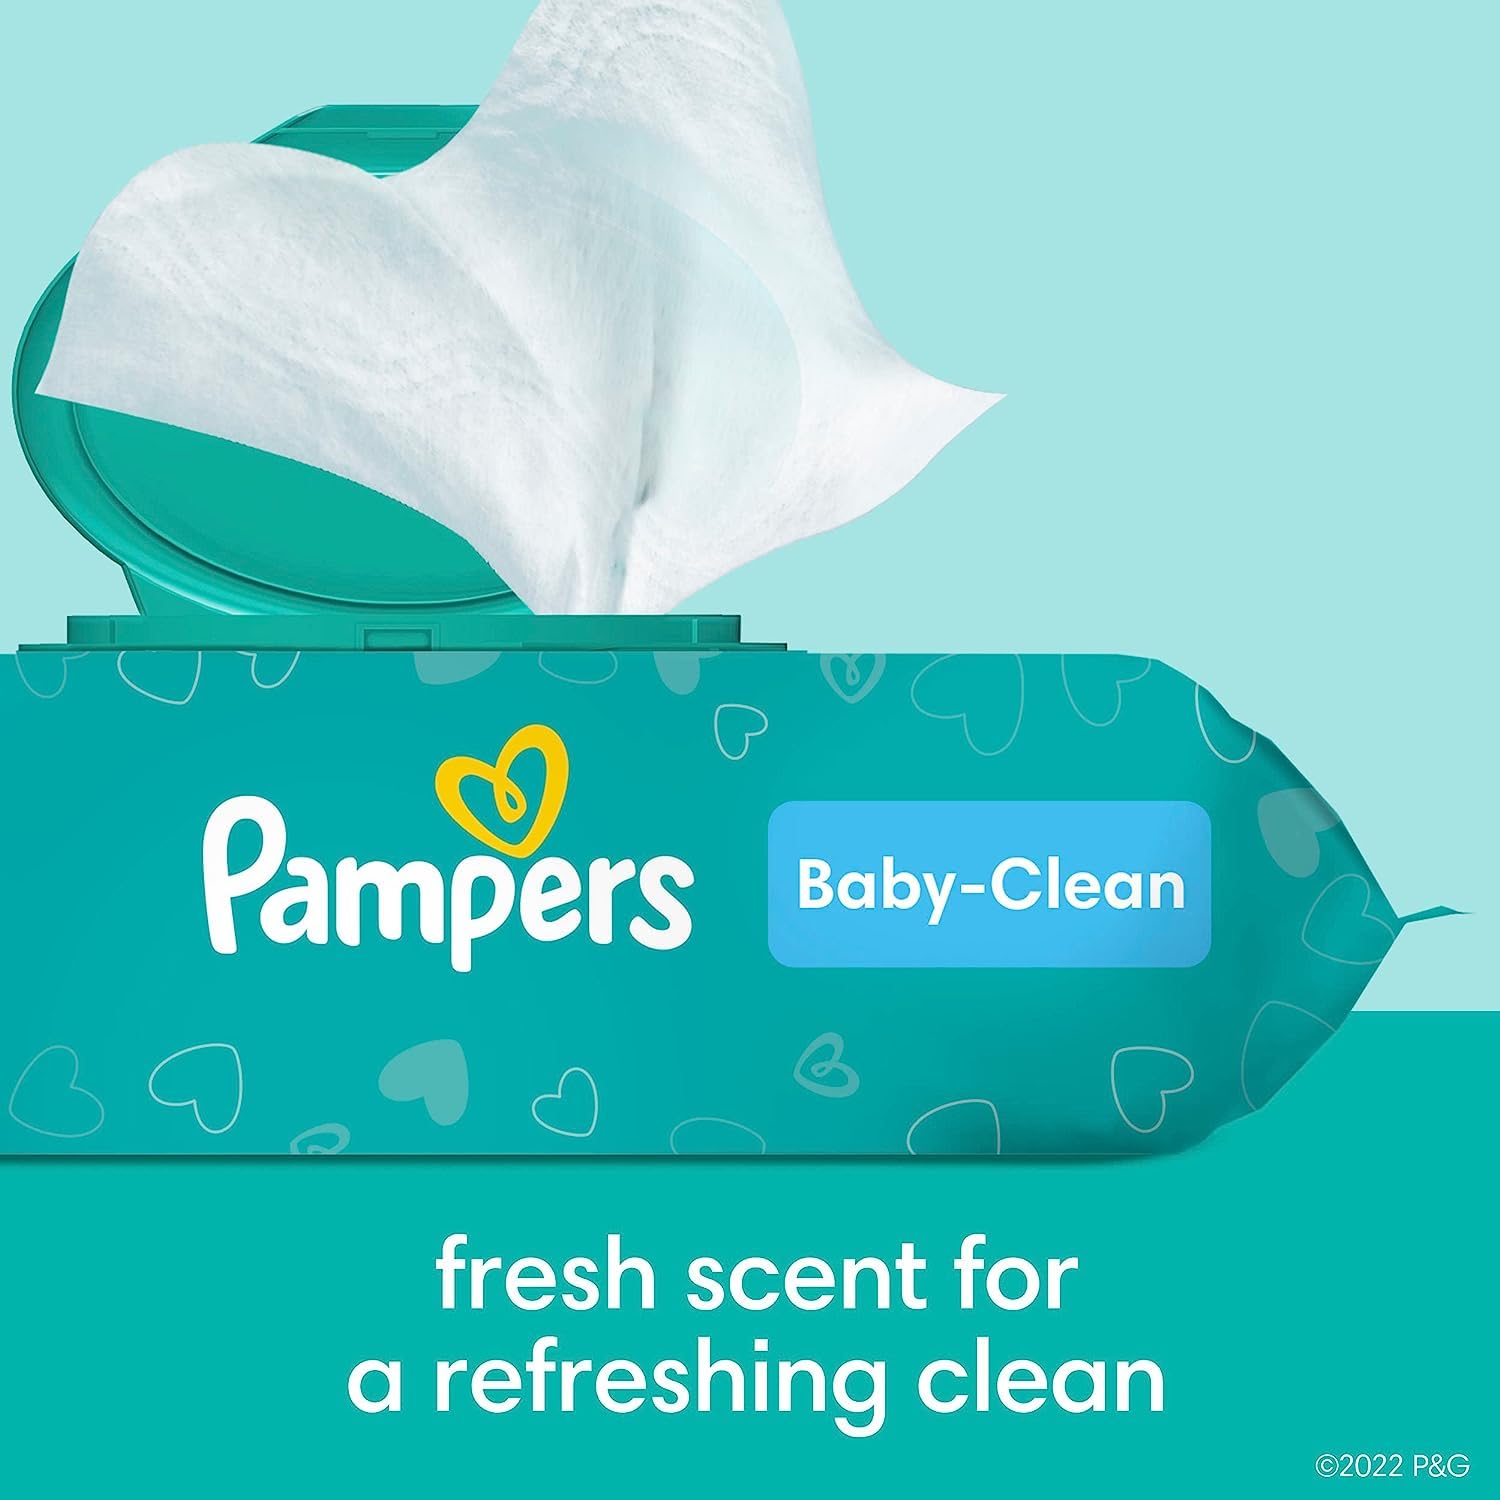 Pampers Baby Fresh Scented Baby Wipes Combo, 1152 count